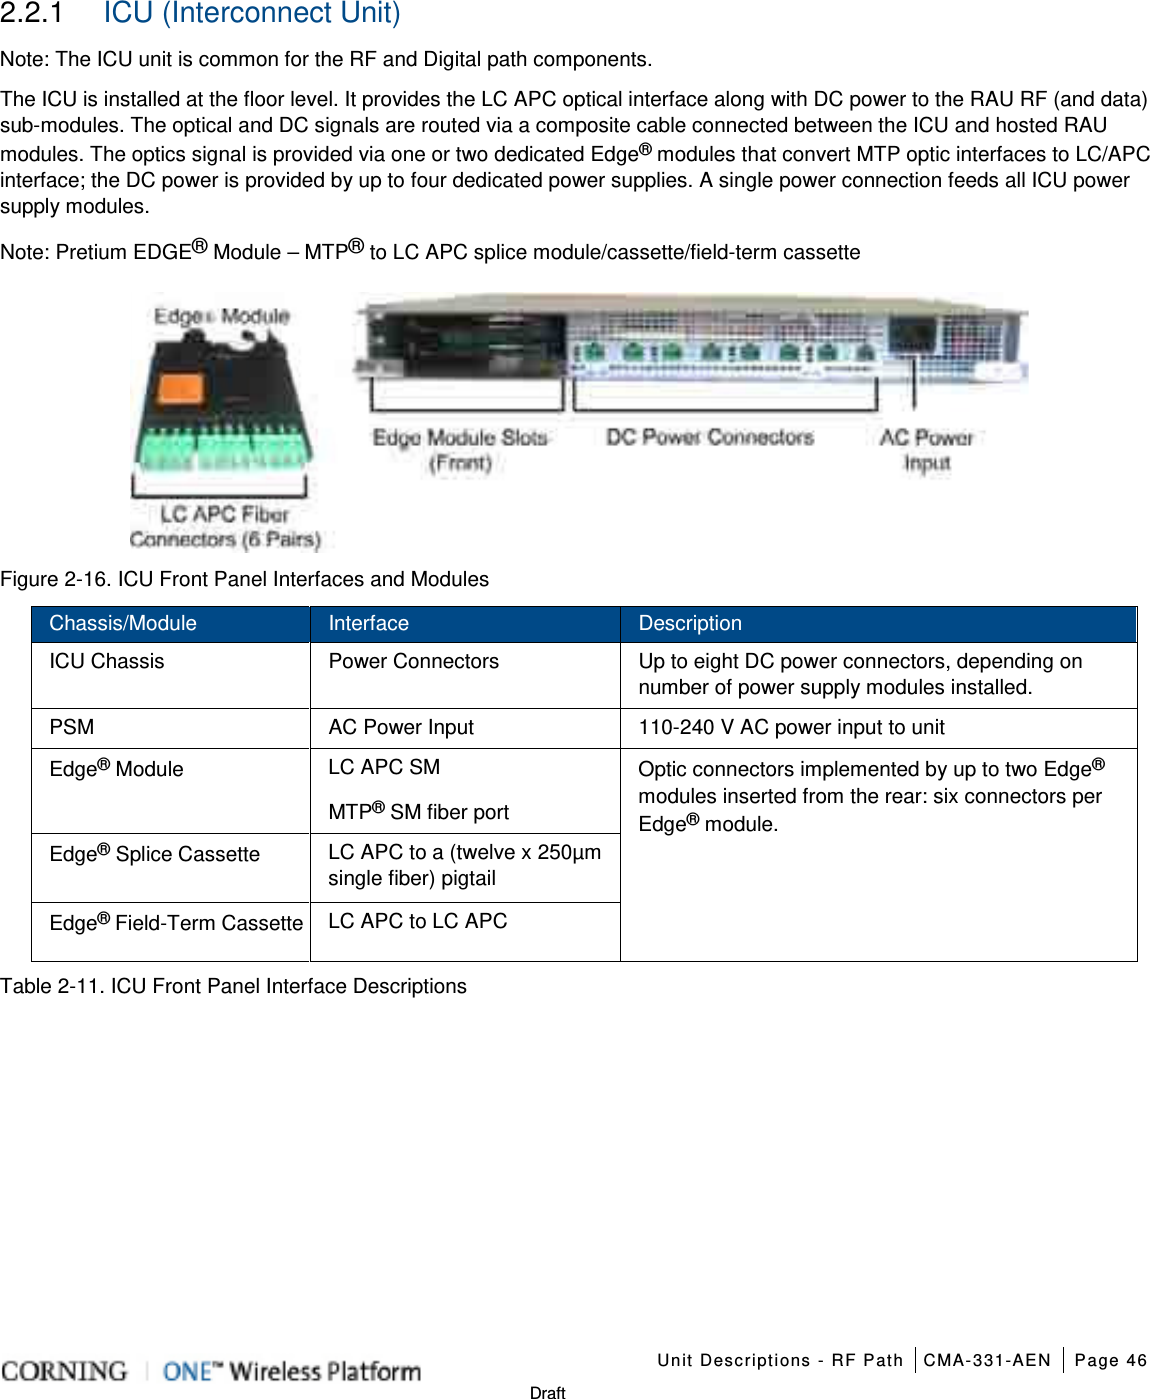    Unit Descriptions - RF Path CMA-331-AEN Page 46   Draft 2.2.1  ICU (Interconnect Unit) Note: The ICU unit is common for the RF and Digital path components. The ICU is installed at the floor level. It provides the LC APC optical interface along with DC power to the RAU RF (and data) sub-modules. The optical and DC signals are routed via a composite cable connected between the ICU and hosted RAU modules. The optics signal is provided via one or two dedicated Edge® modules that convert MTP optic interfaces to LC/APC interface; the DC power is provided by up to four dedicated power supplies. A single power connection feeds all ICU power supply modules. Note: Pretium EDGE® Module – MTP® to LC APC splice module/cassette/field-term cassette  Figure  2-16. ICU Front Panel Interfaces and Modules Chassis/Module Interface Description ICU Chassis Power Connectors Up to eight DC power connectors, depending on number of power supply modules installed. PSM AC Power Input 110-240 V AC power input to unit Edge® Module LC APC SM Optic connectors implemented by up to two Edge® modules inserted from the rear: six connectors per Edge® module. MTP® SM fiber port Edge® Splice Cassette LC APC to a (twelve x 250µm single fiber) pigtail Edge® Field-Term Cassette LC APC to LC APC Table  2-11. ICU Front Panel Interface Descriptions    